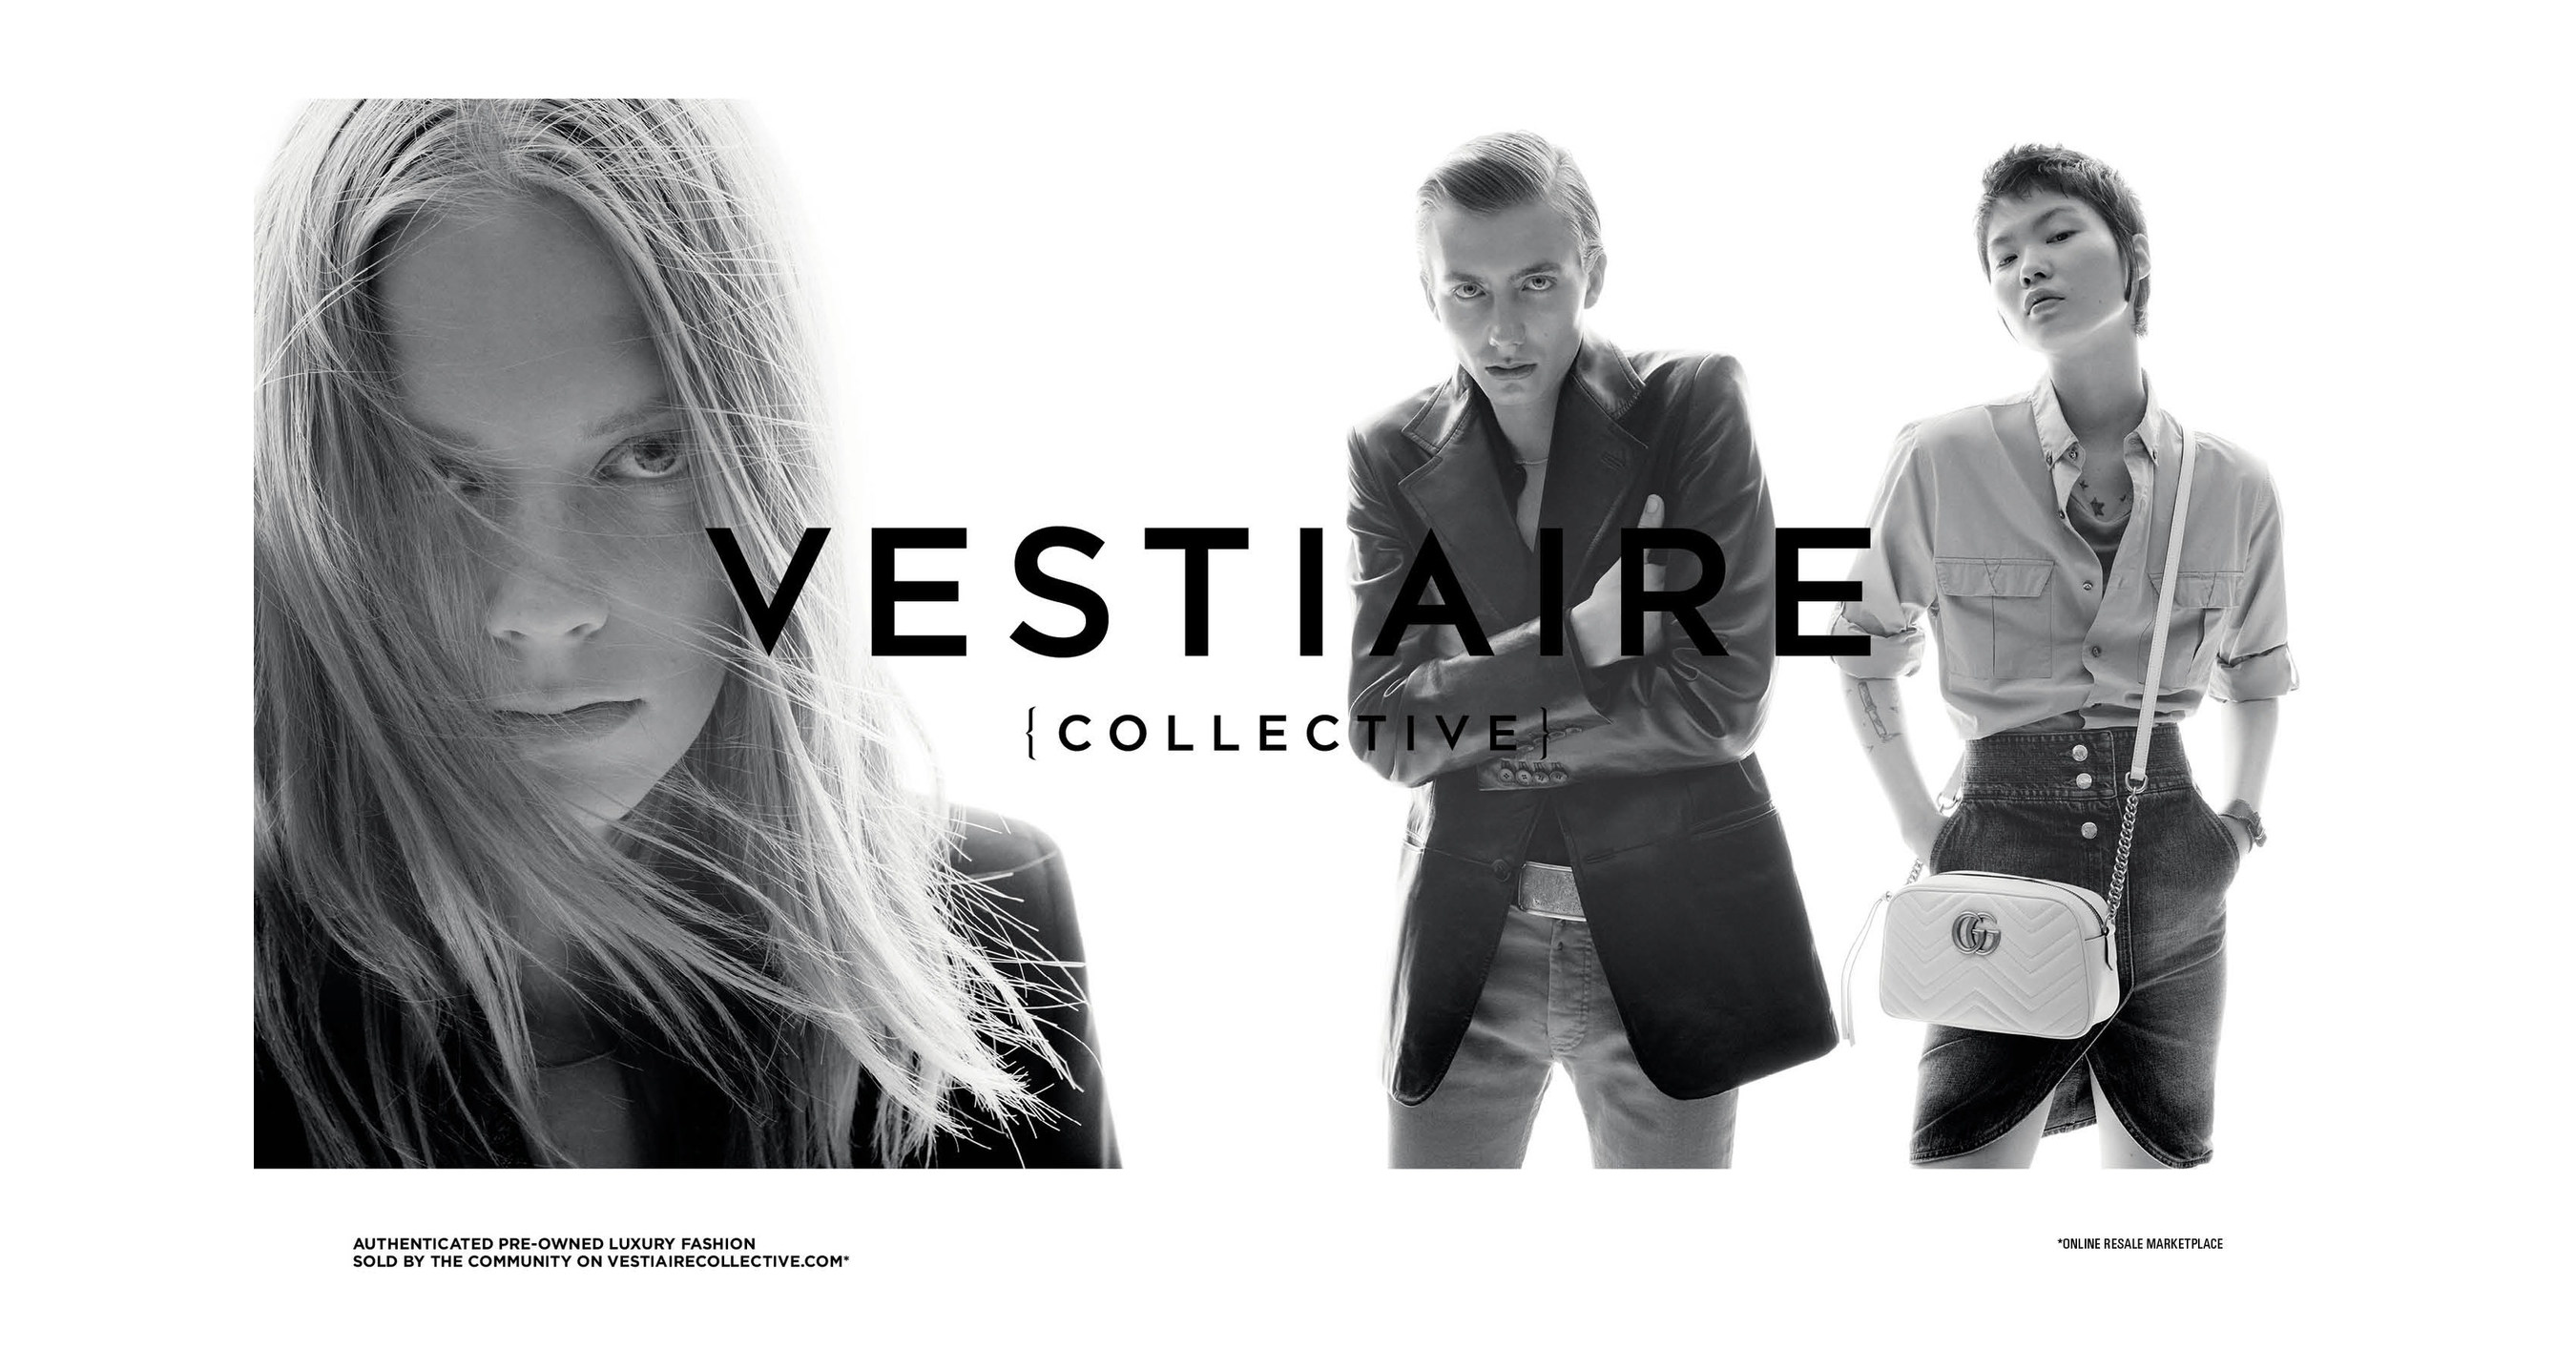 Vestiaire Collective Celebrates Global Expansion With Debut-Fashion Campaign  Tapping Top-Tier Creative Team And Cast